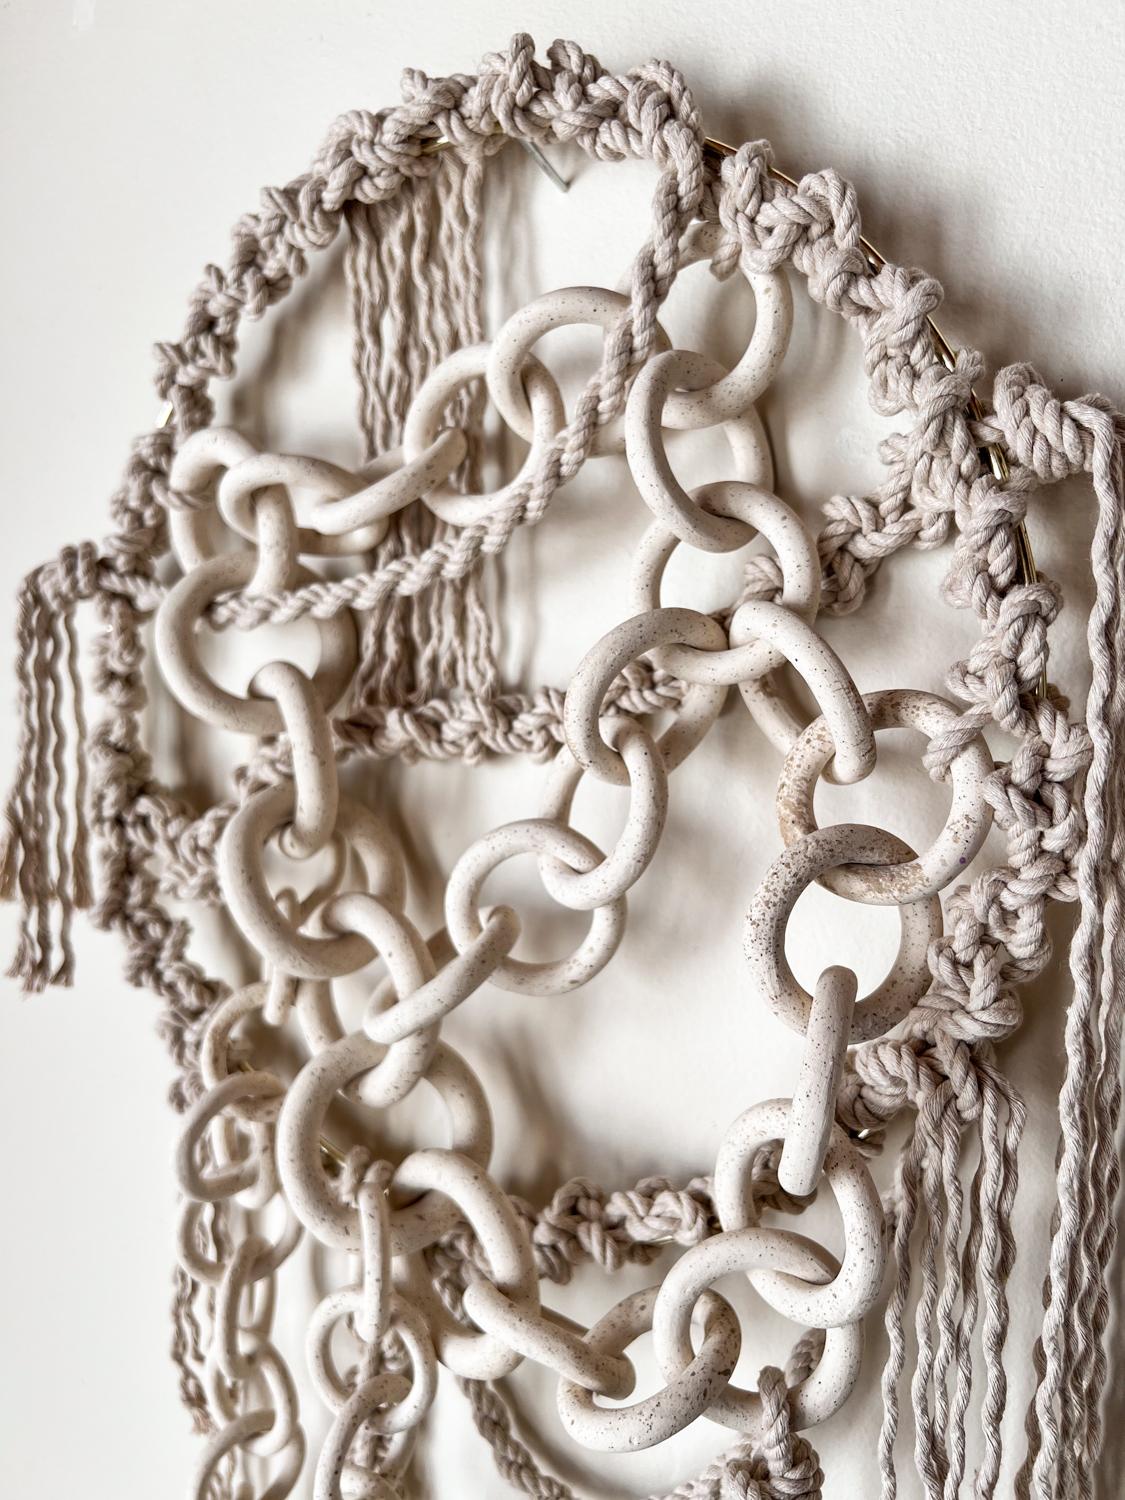 Hand-Crafted Ceramic Link Chain Wall Sculpture For Sale